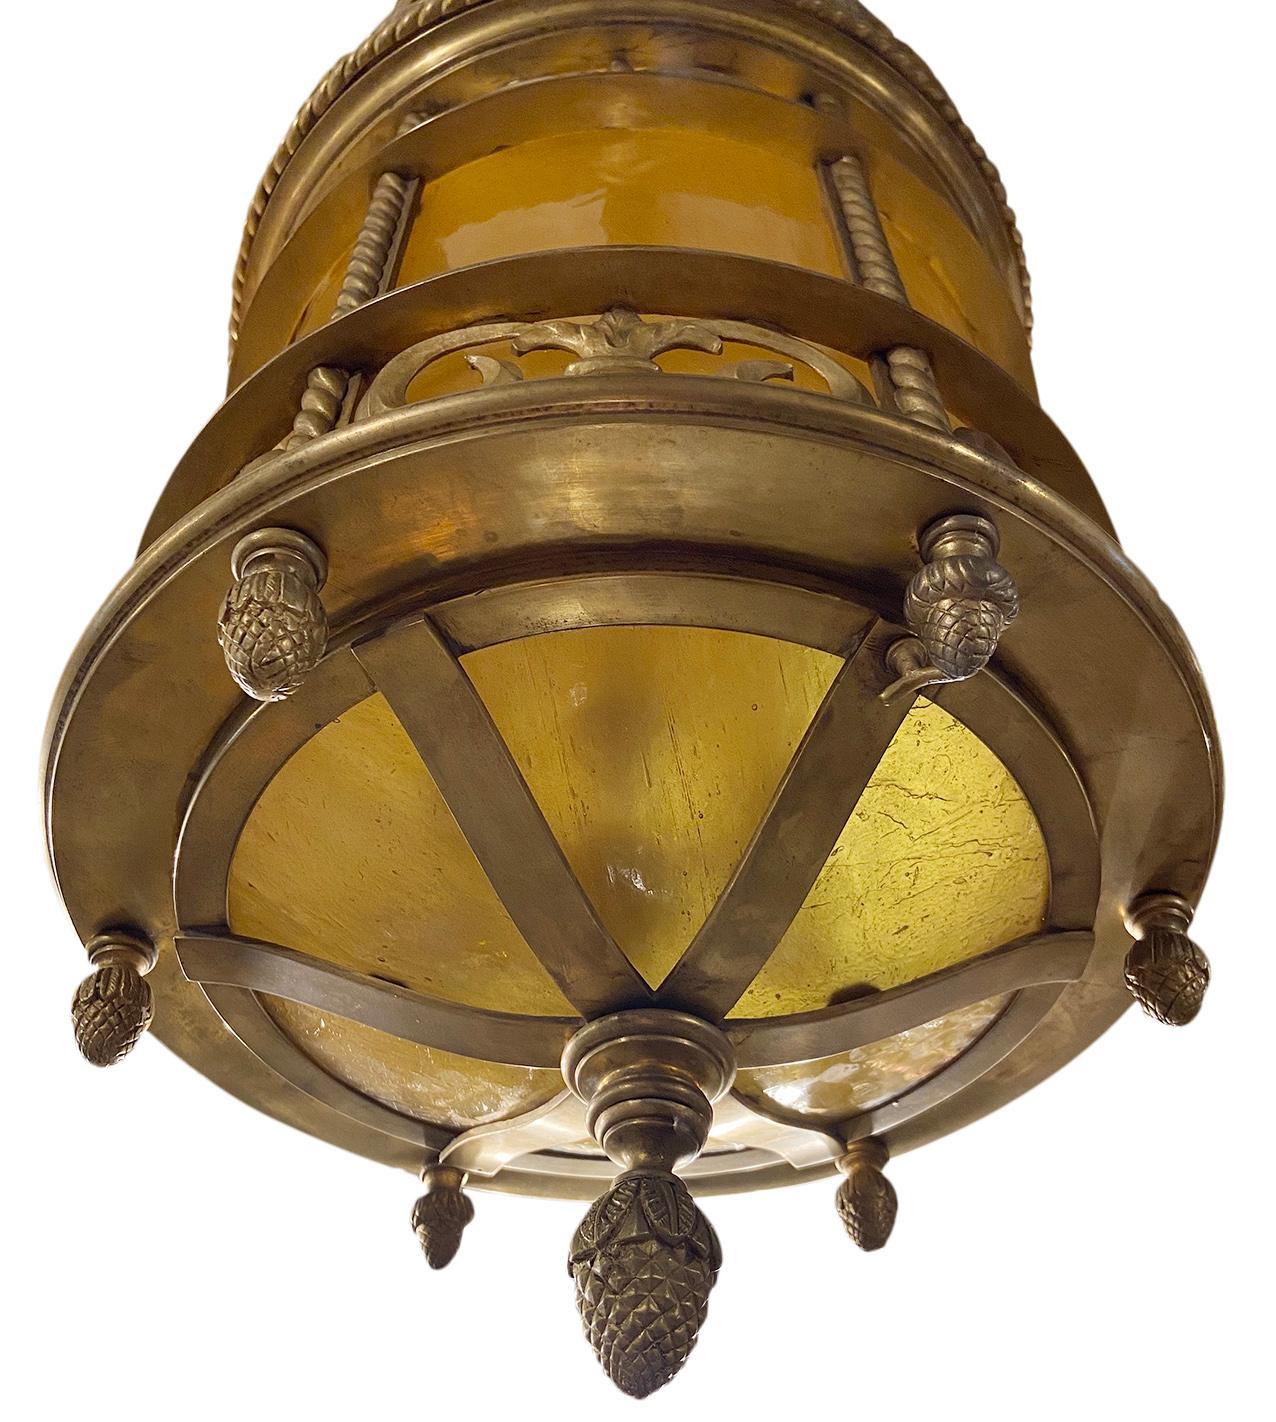 A circa 1920s American gilt bronze lantern with amber leaded glass, original finish and patina.

Measurements:
Height 33.5